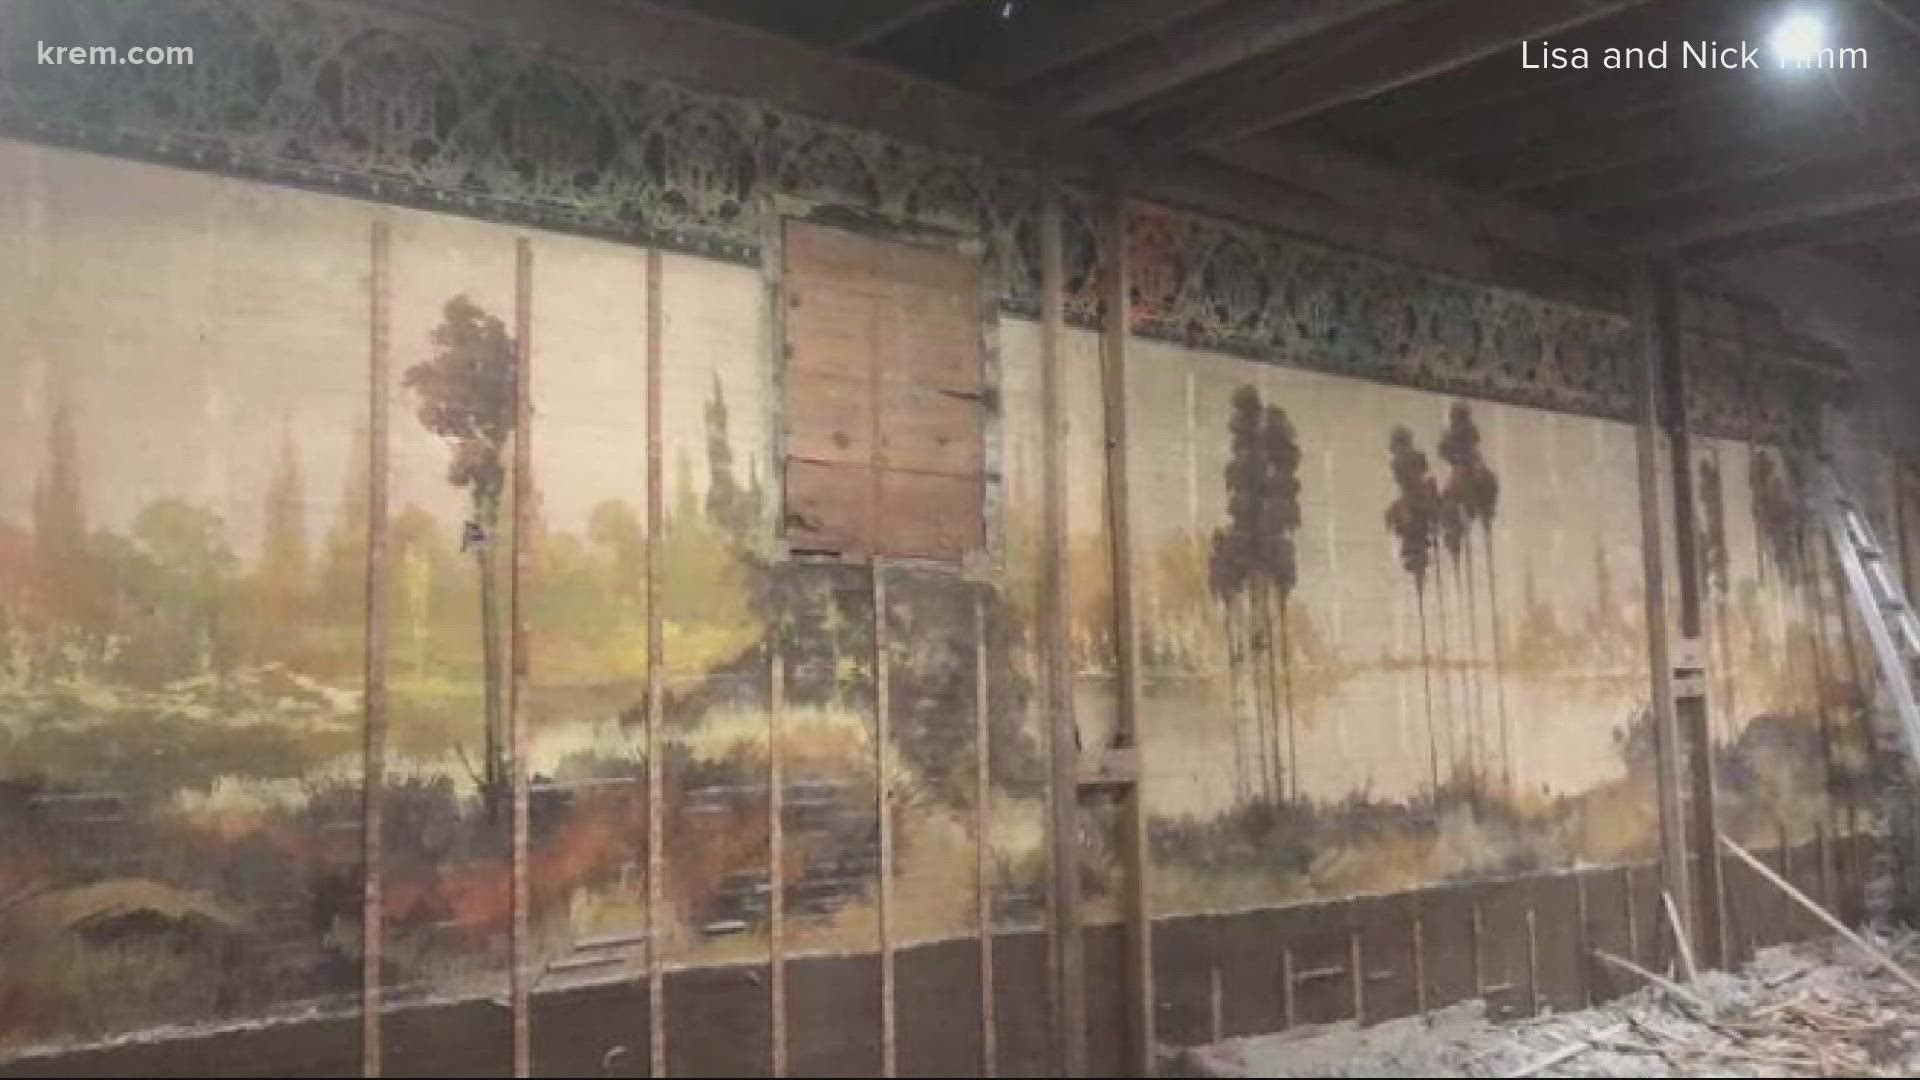 No signature has been found on the mural, but there is a possibility it was painted by famed Western photographer Frank Matsura.